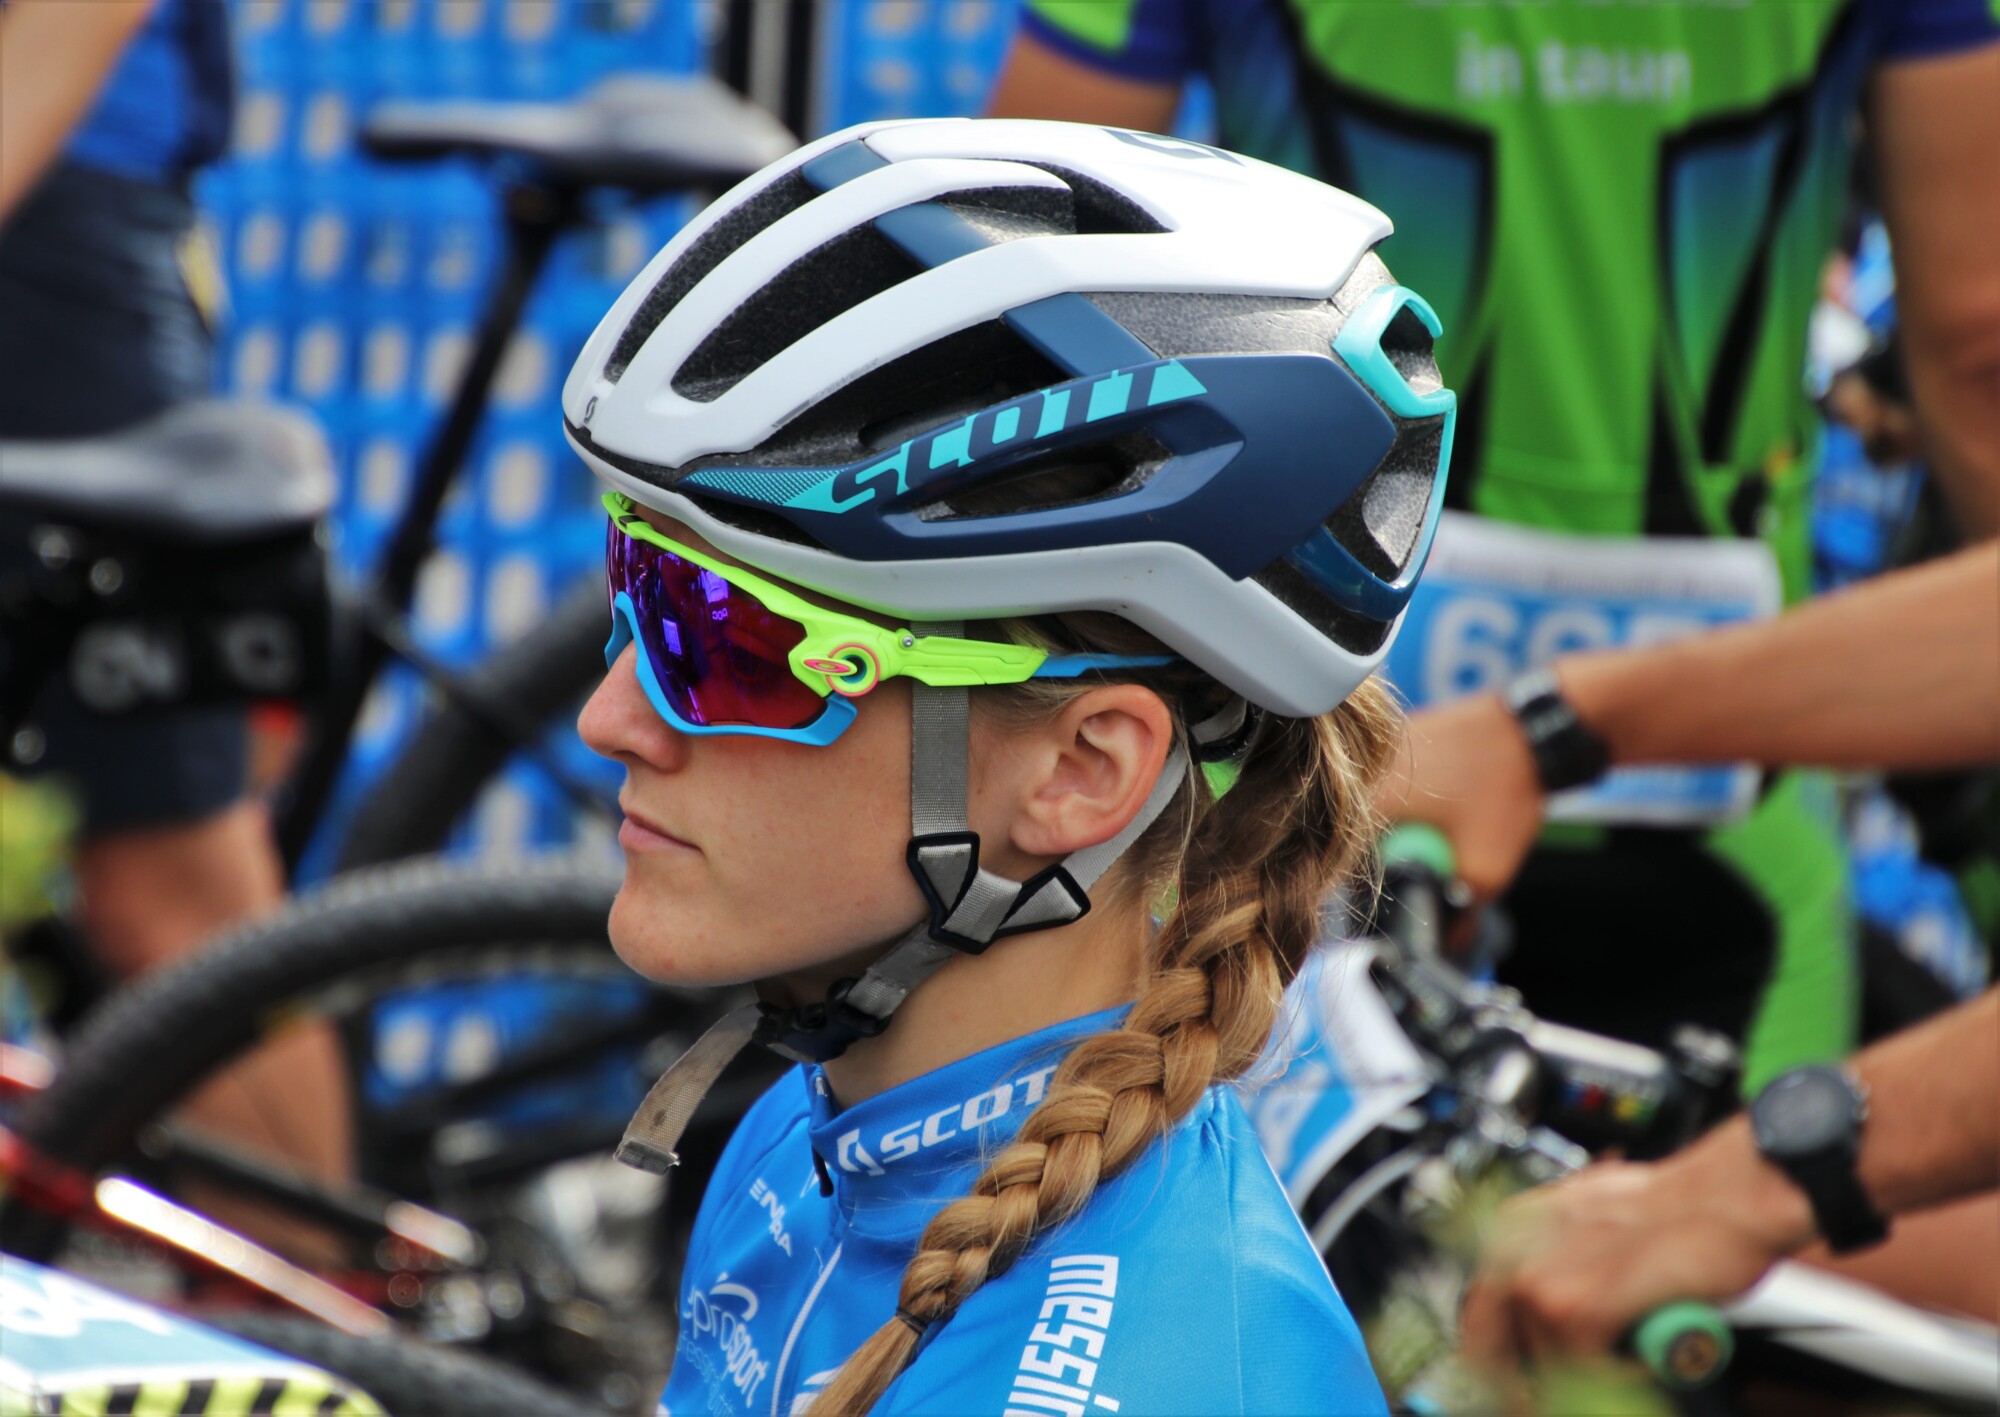 A woman cyclist wearing sports sunglasses while waiting for the marathon to start